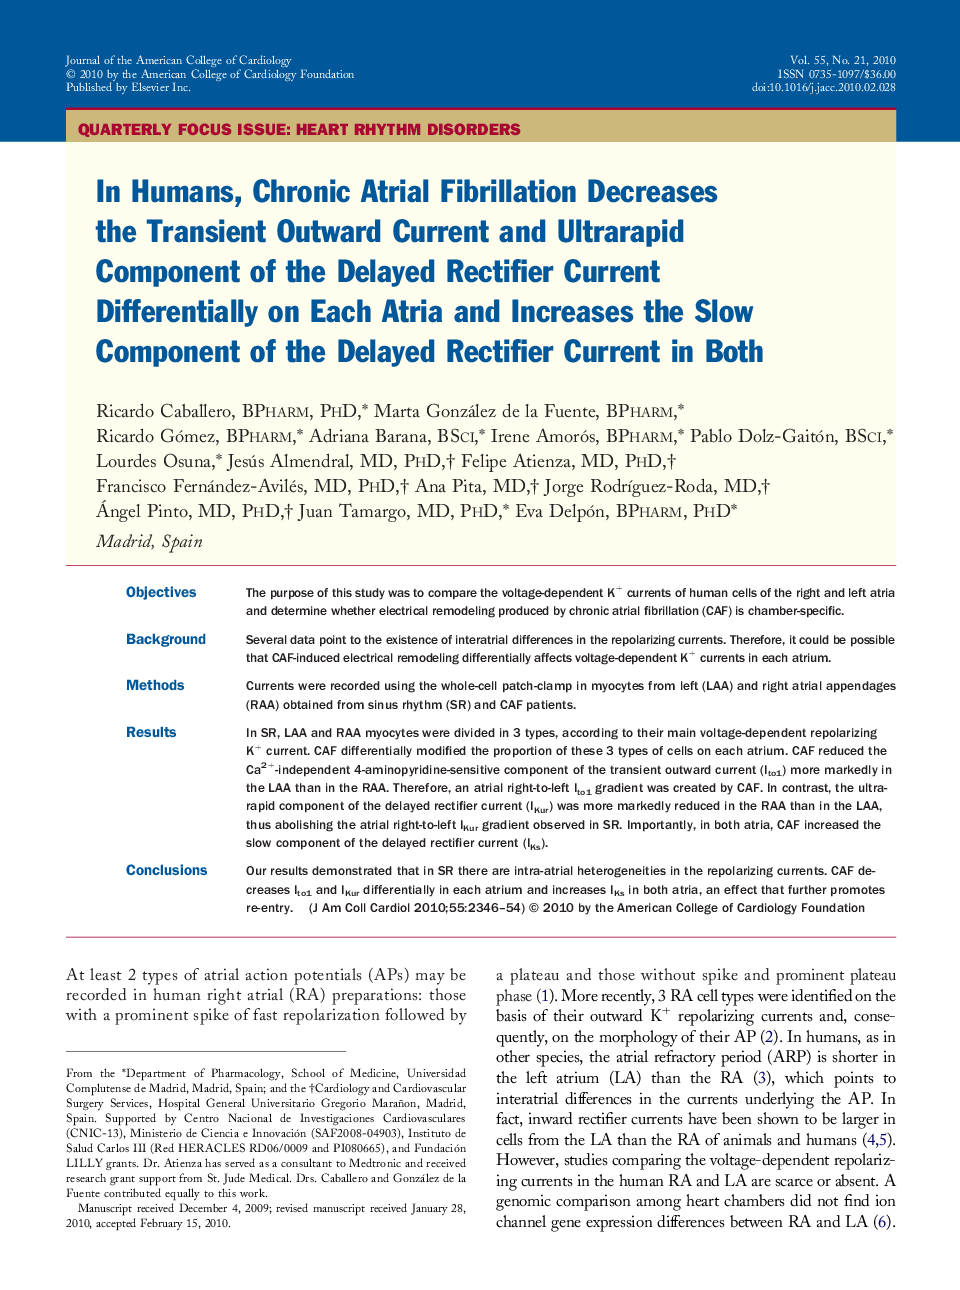 In Humans, Chronic Atrial Fibrillation Decreases the Transient Outward Current and Ultrarapid Component of the Delayed Rectifier Current Differentially on Each Atria and Increases the Slow Component of the Delayed Rectifier Current in Both 